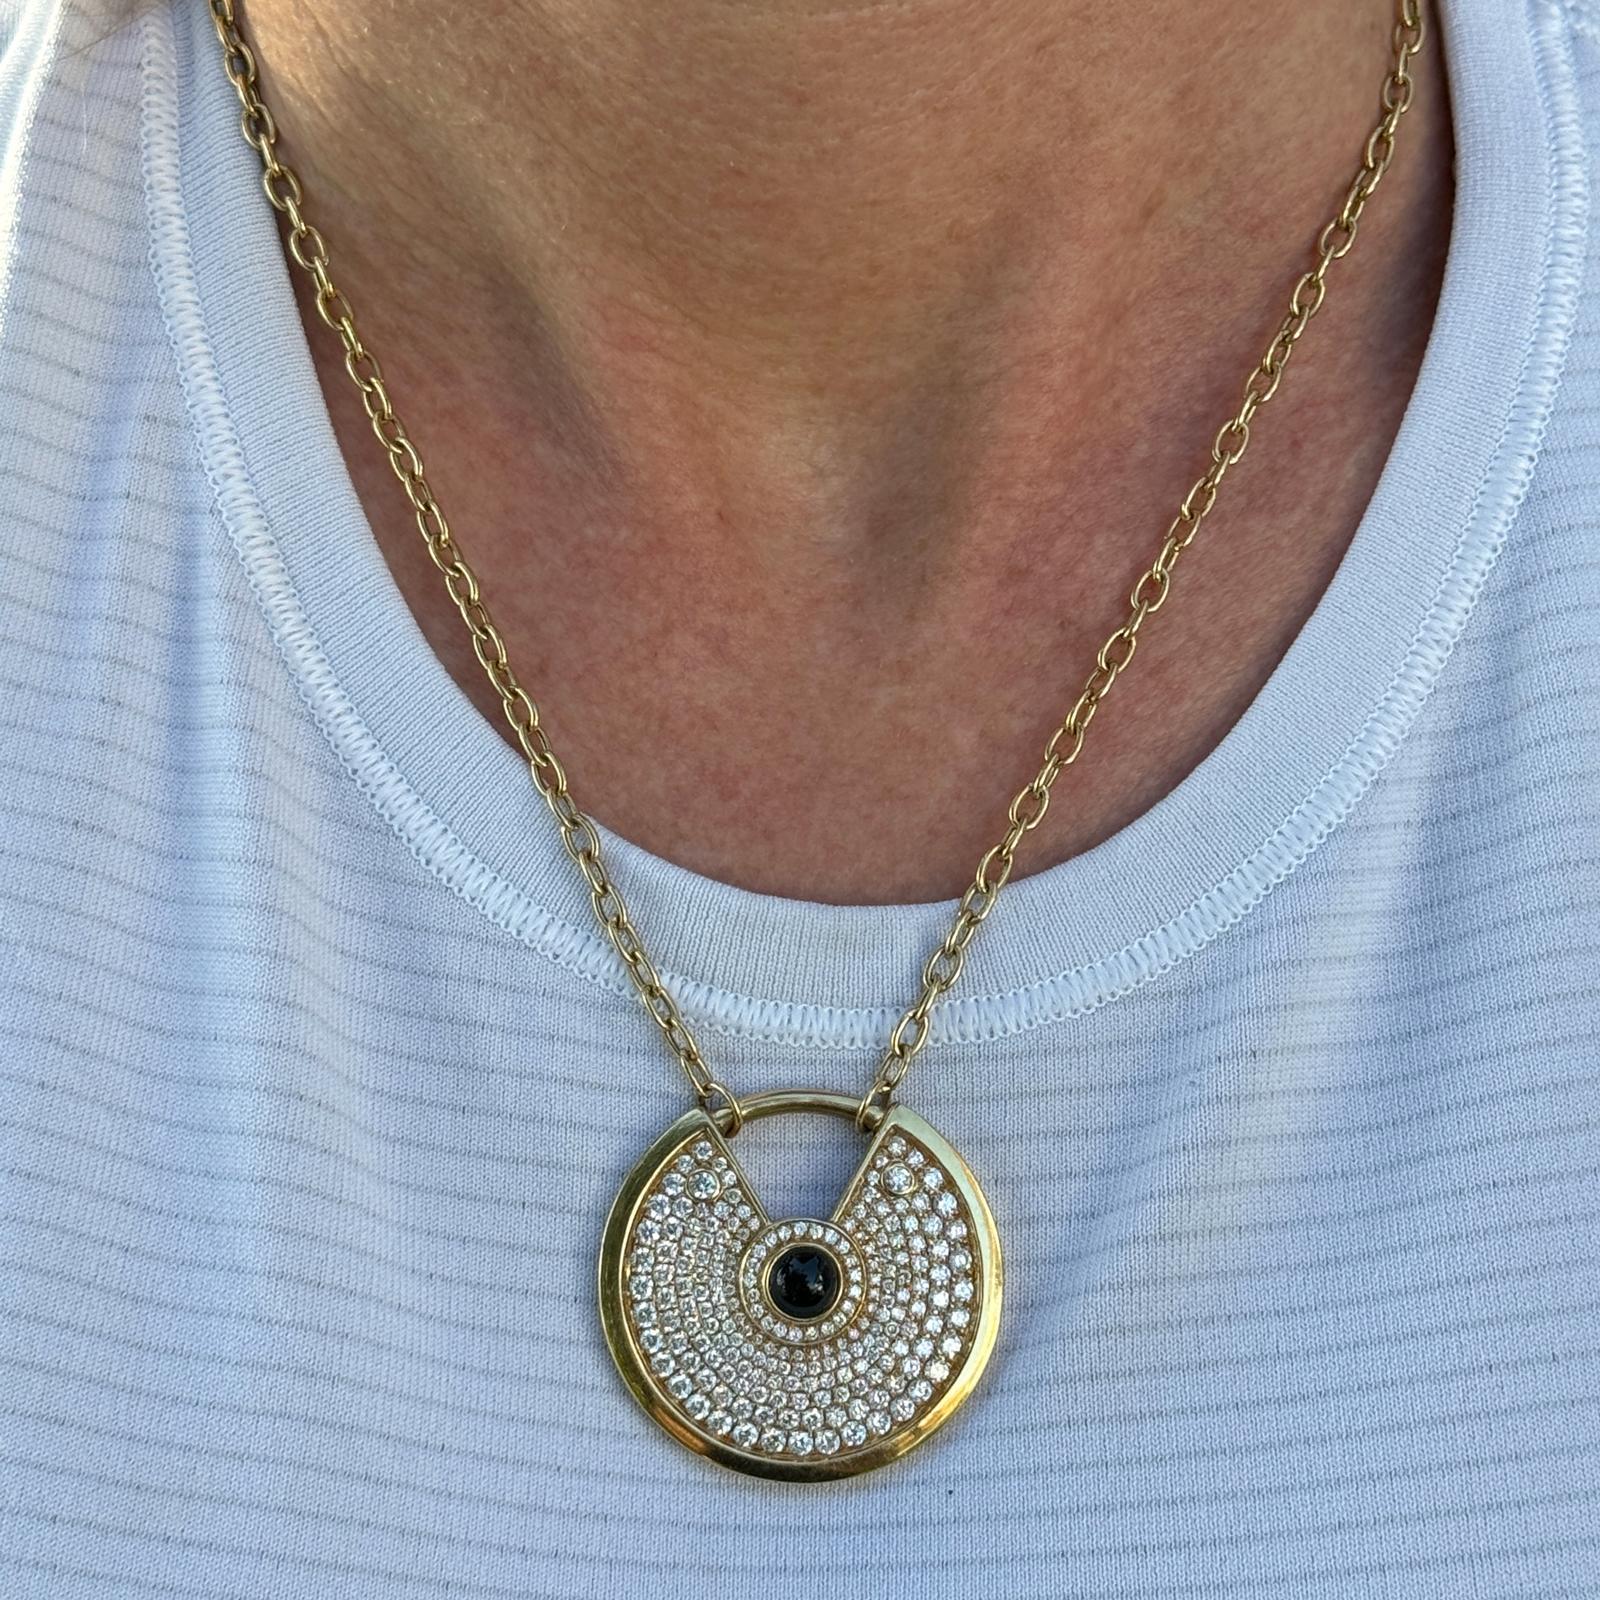 The Modern Diamond Onyx 18K Yellow Gold Amulette Pendant Necklace is a contemporary and stylish piece of jewelry that combines luxury with symbolism. The pendant features a modern interpretation of the traditional amulet or talisman, symbolizing